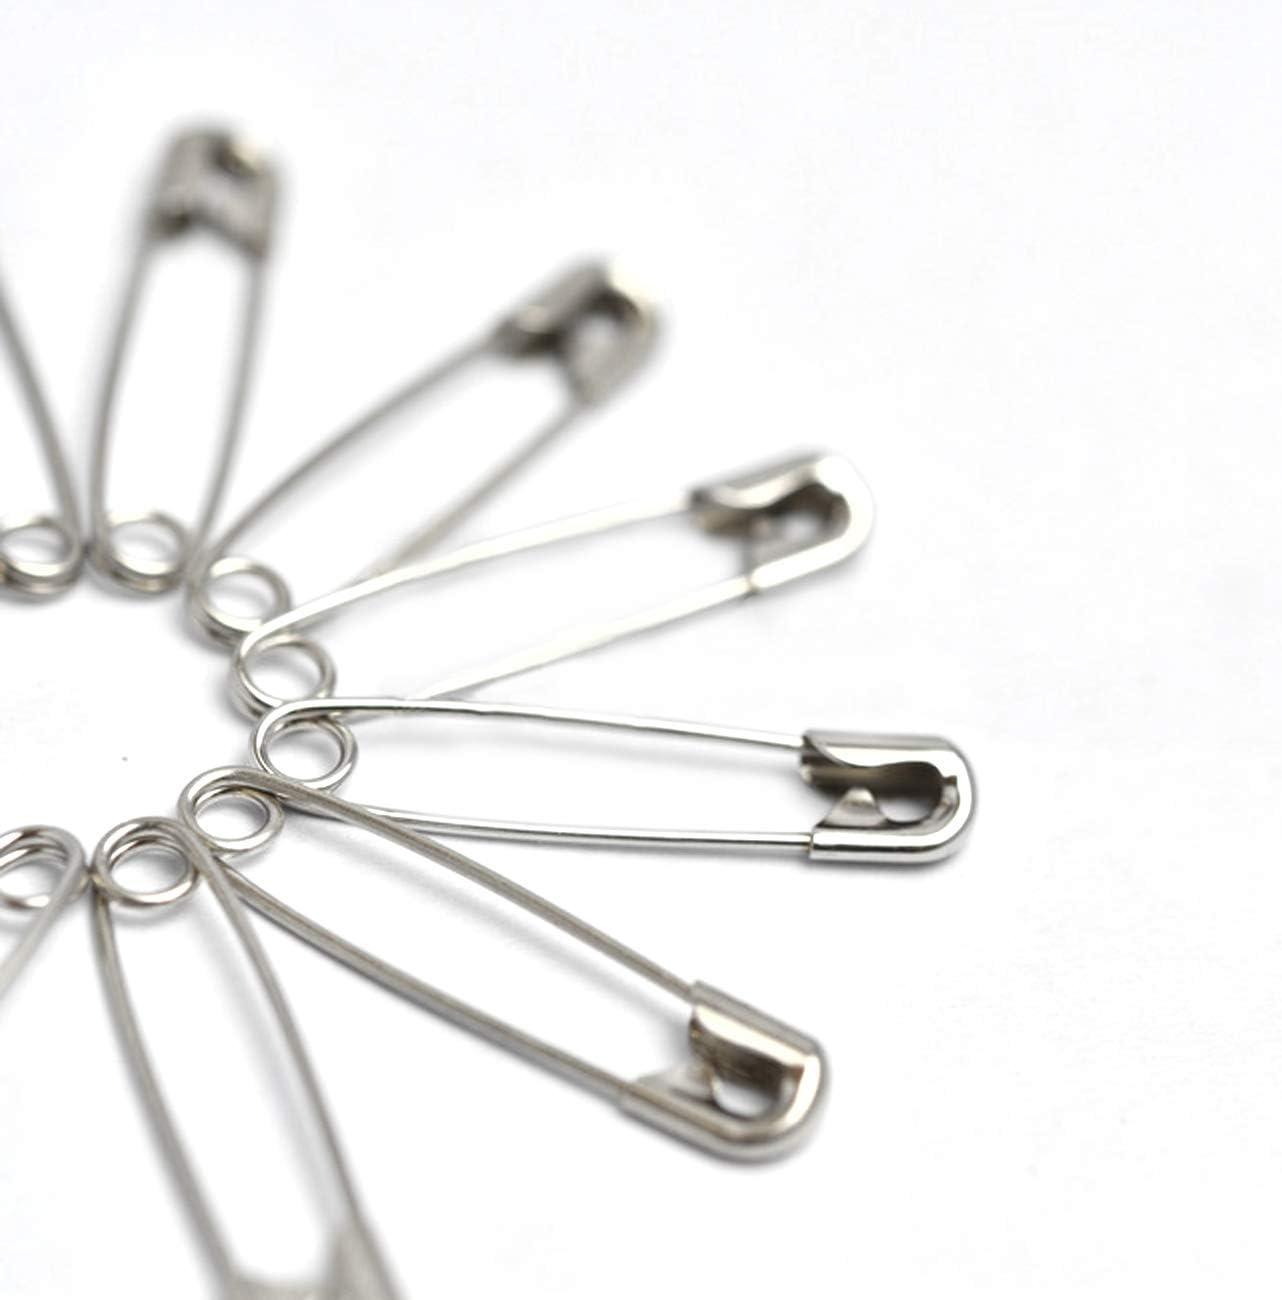 1000Pieces -Safety Pins 1.1 inch Safety Pins Bulk Metal Silver Sewing Pins  Clothing Clips Tool 28mm/ 1.1 inch Decorative Safety pins Sewing  Accessories Kit for Baby Clothing Jewelry Makin (1.1 inch) 1.1inch-1000